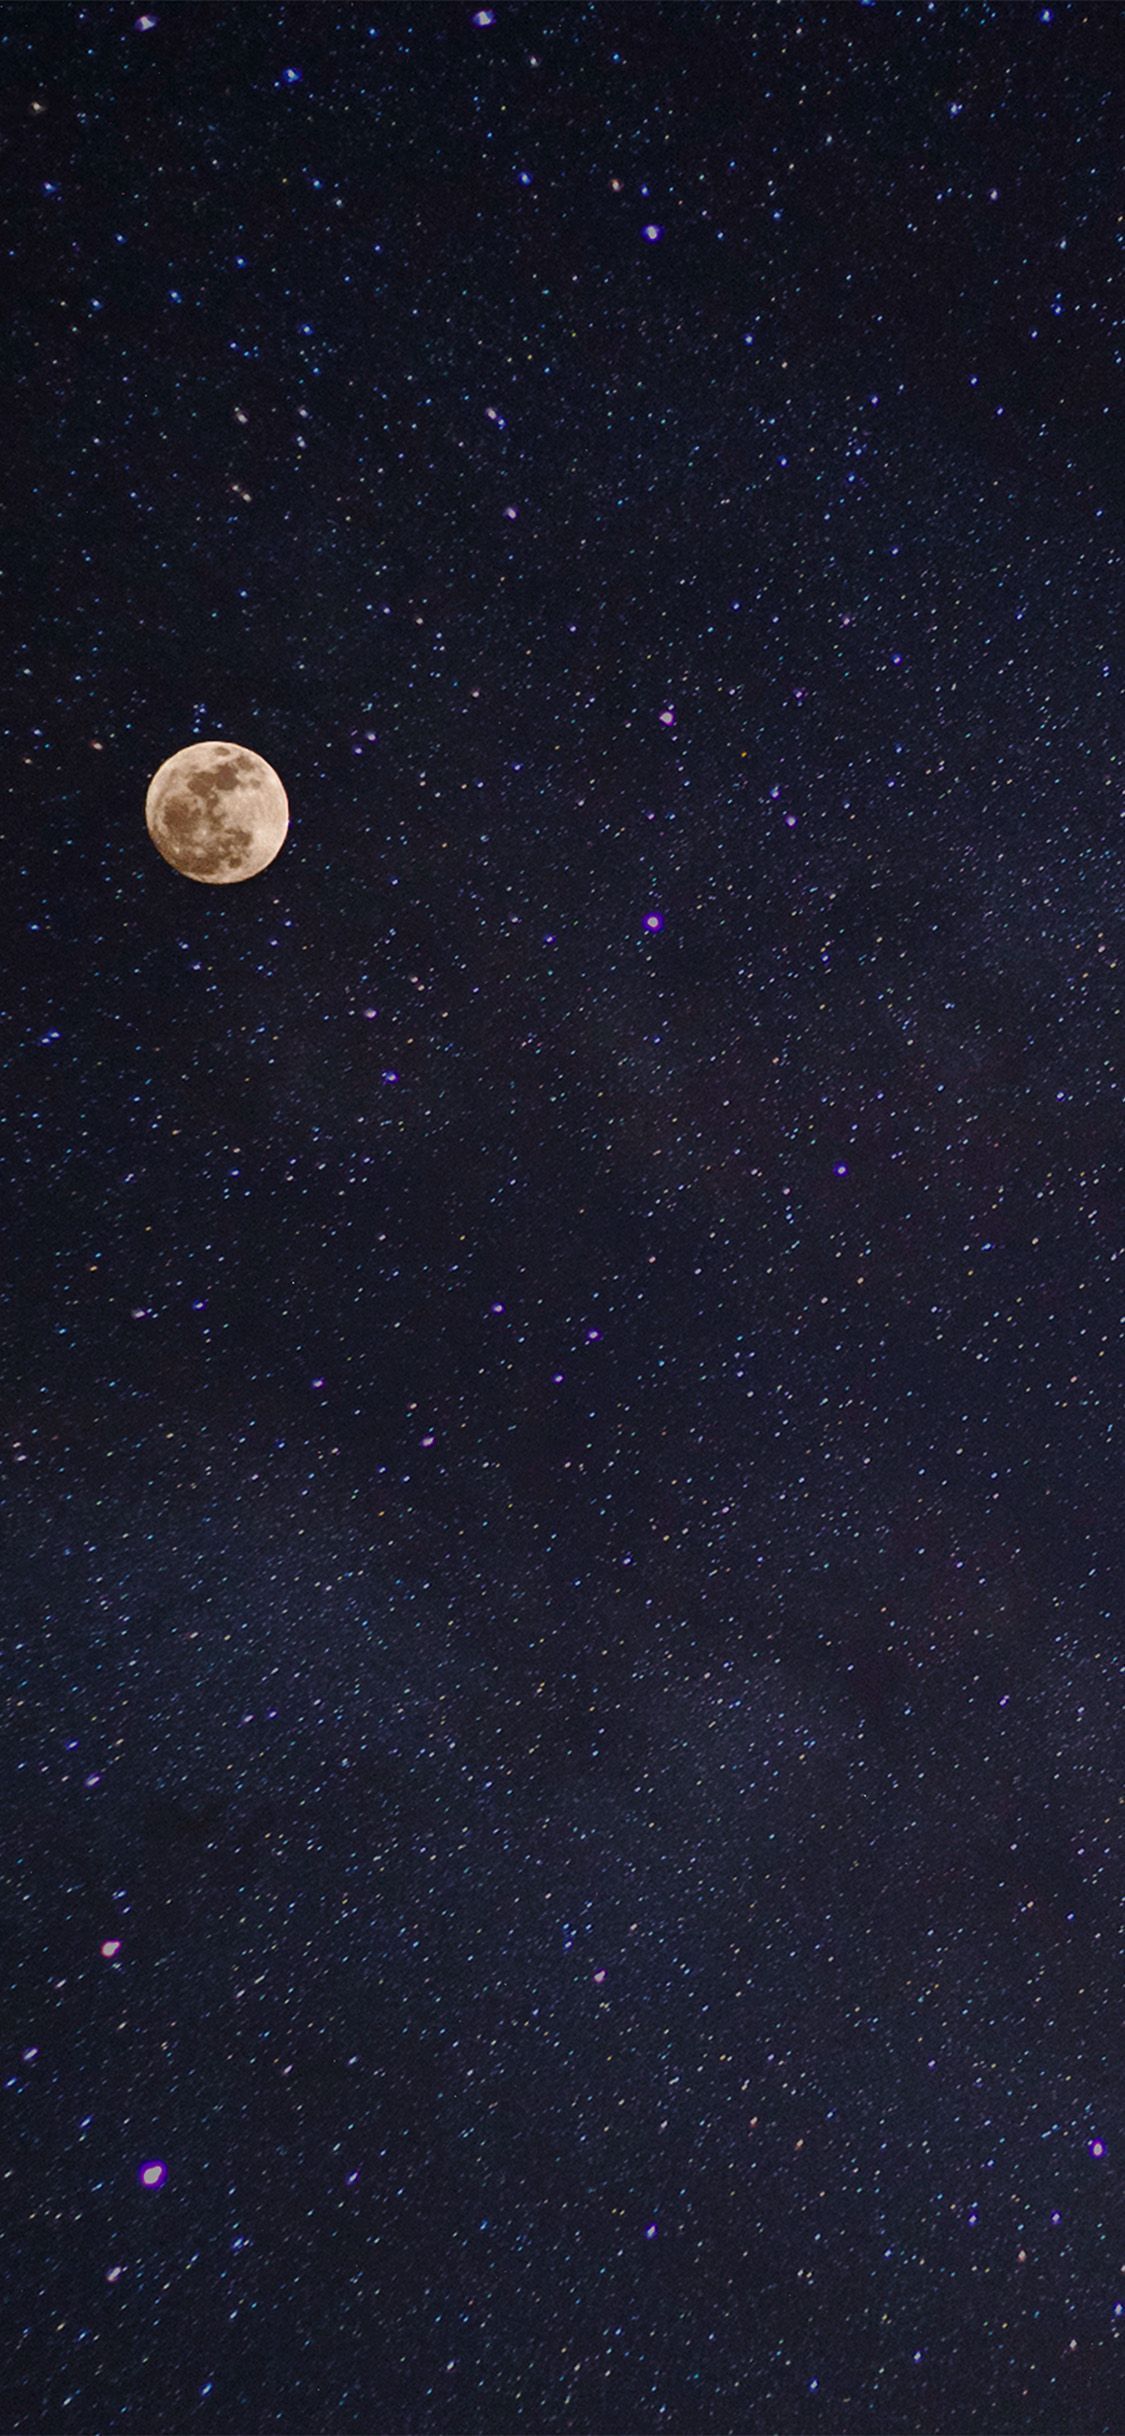 Moon Night Space Star Nature Via For IPhone X. IPhone Wallpaper Night, IPhone Wallpaper Night Sky, IPhone Wallpaper Sky